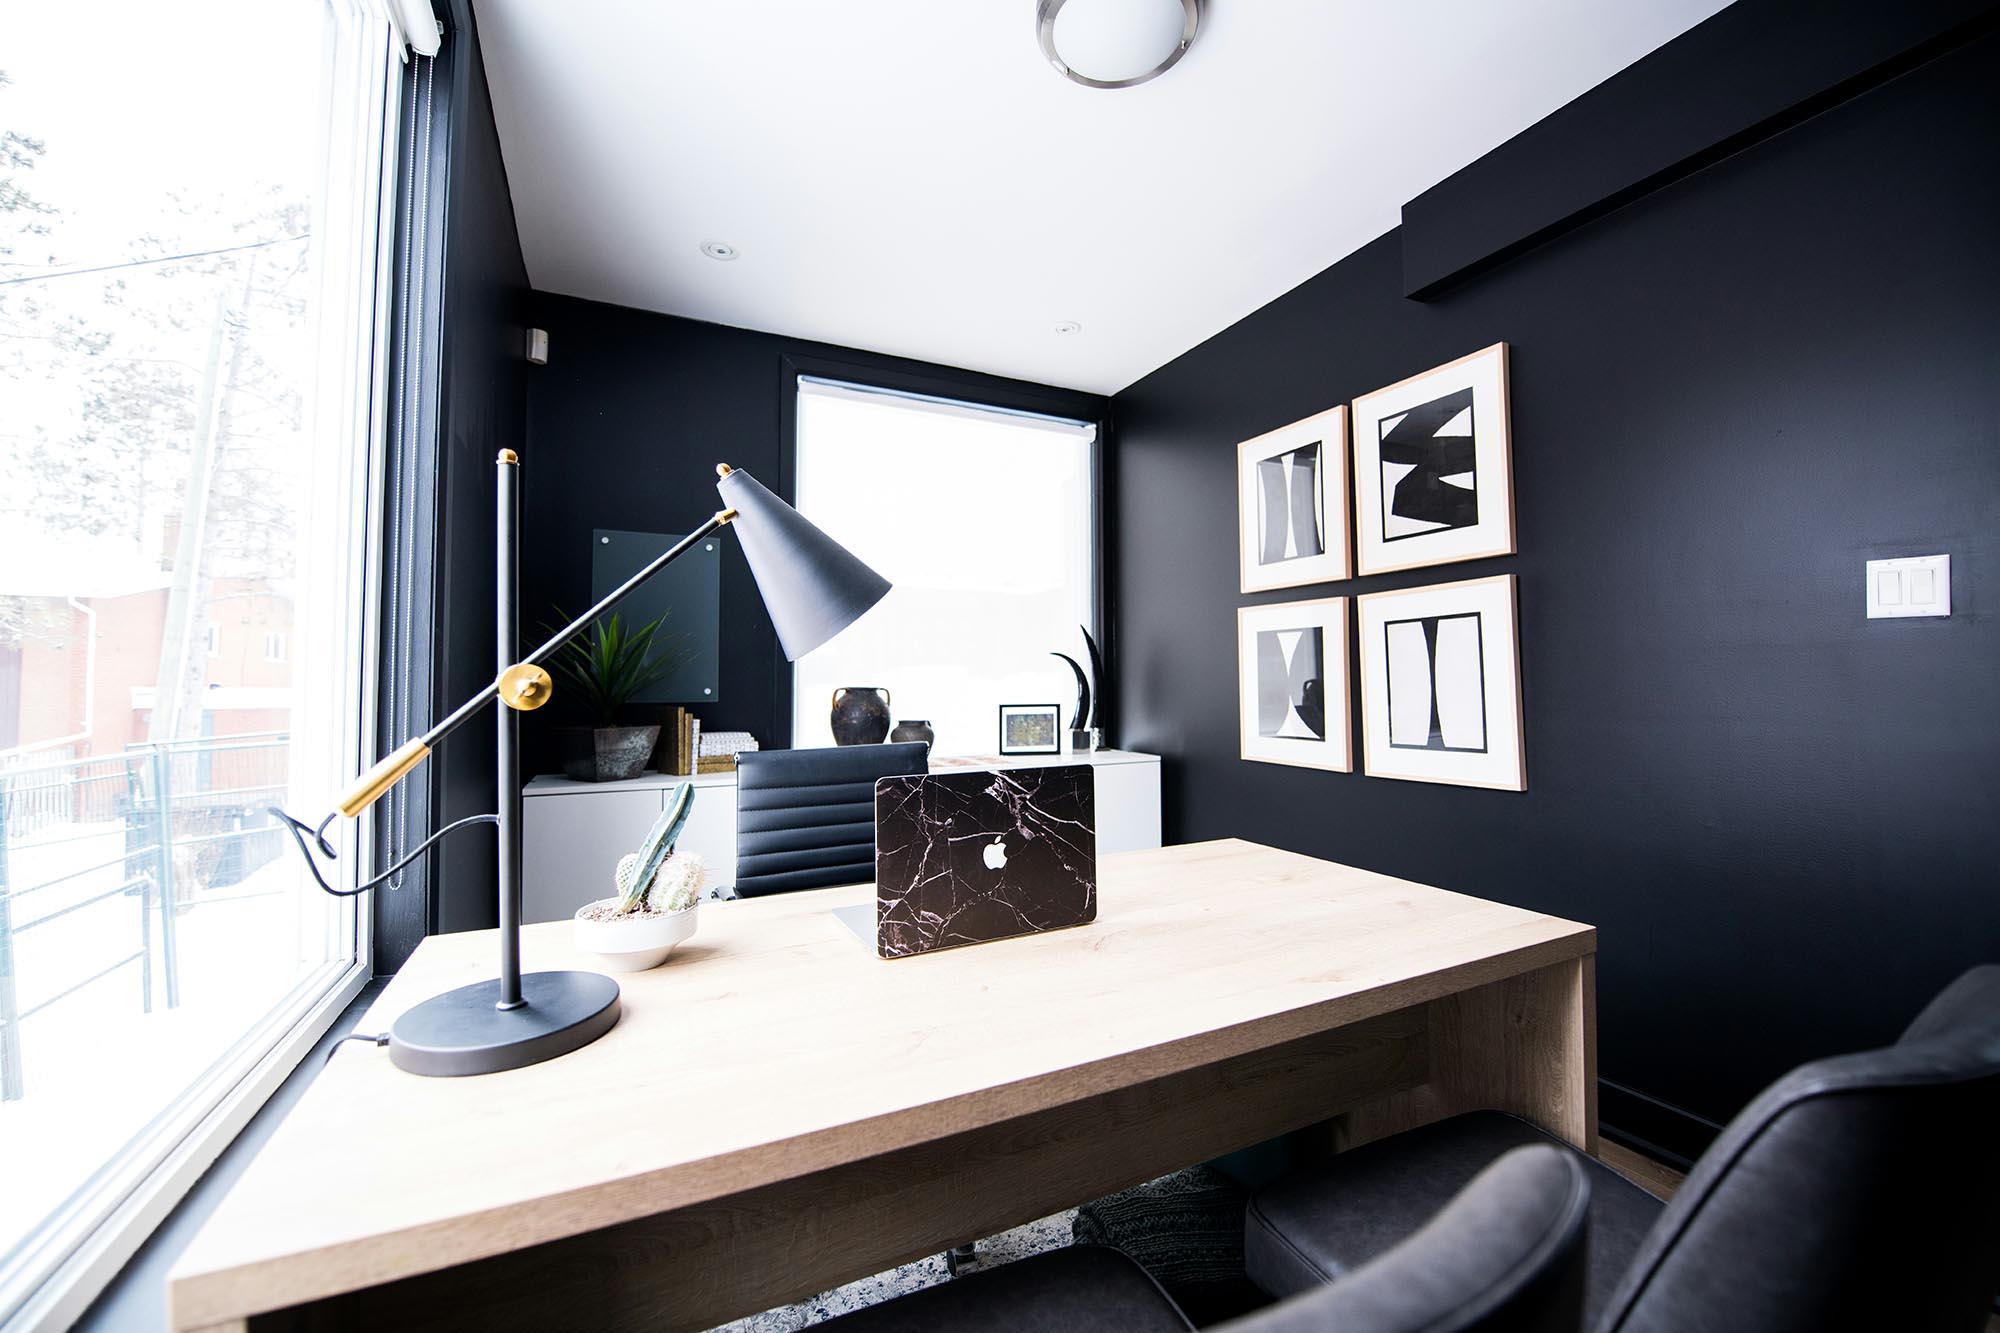 Buying Office Furniture: Essential Tips to Consider When Furnishing Your Workplace